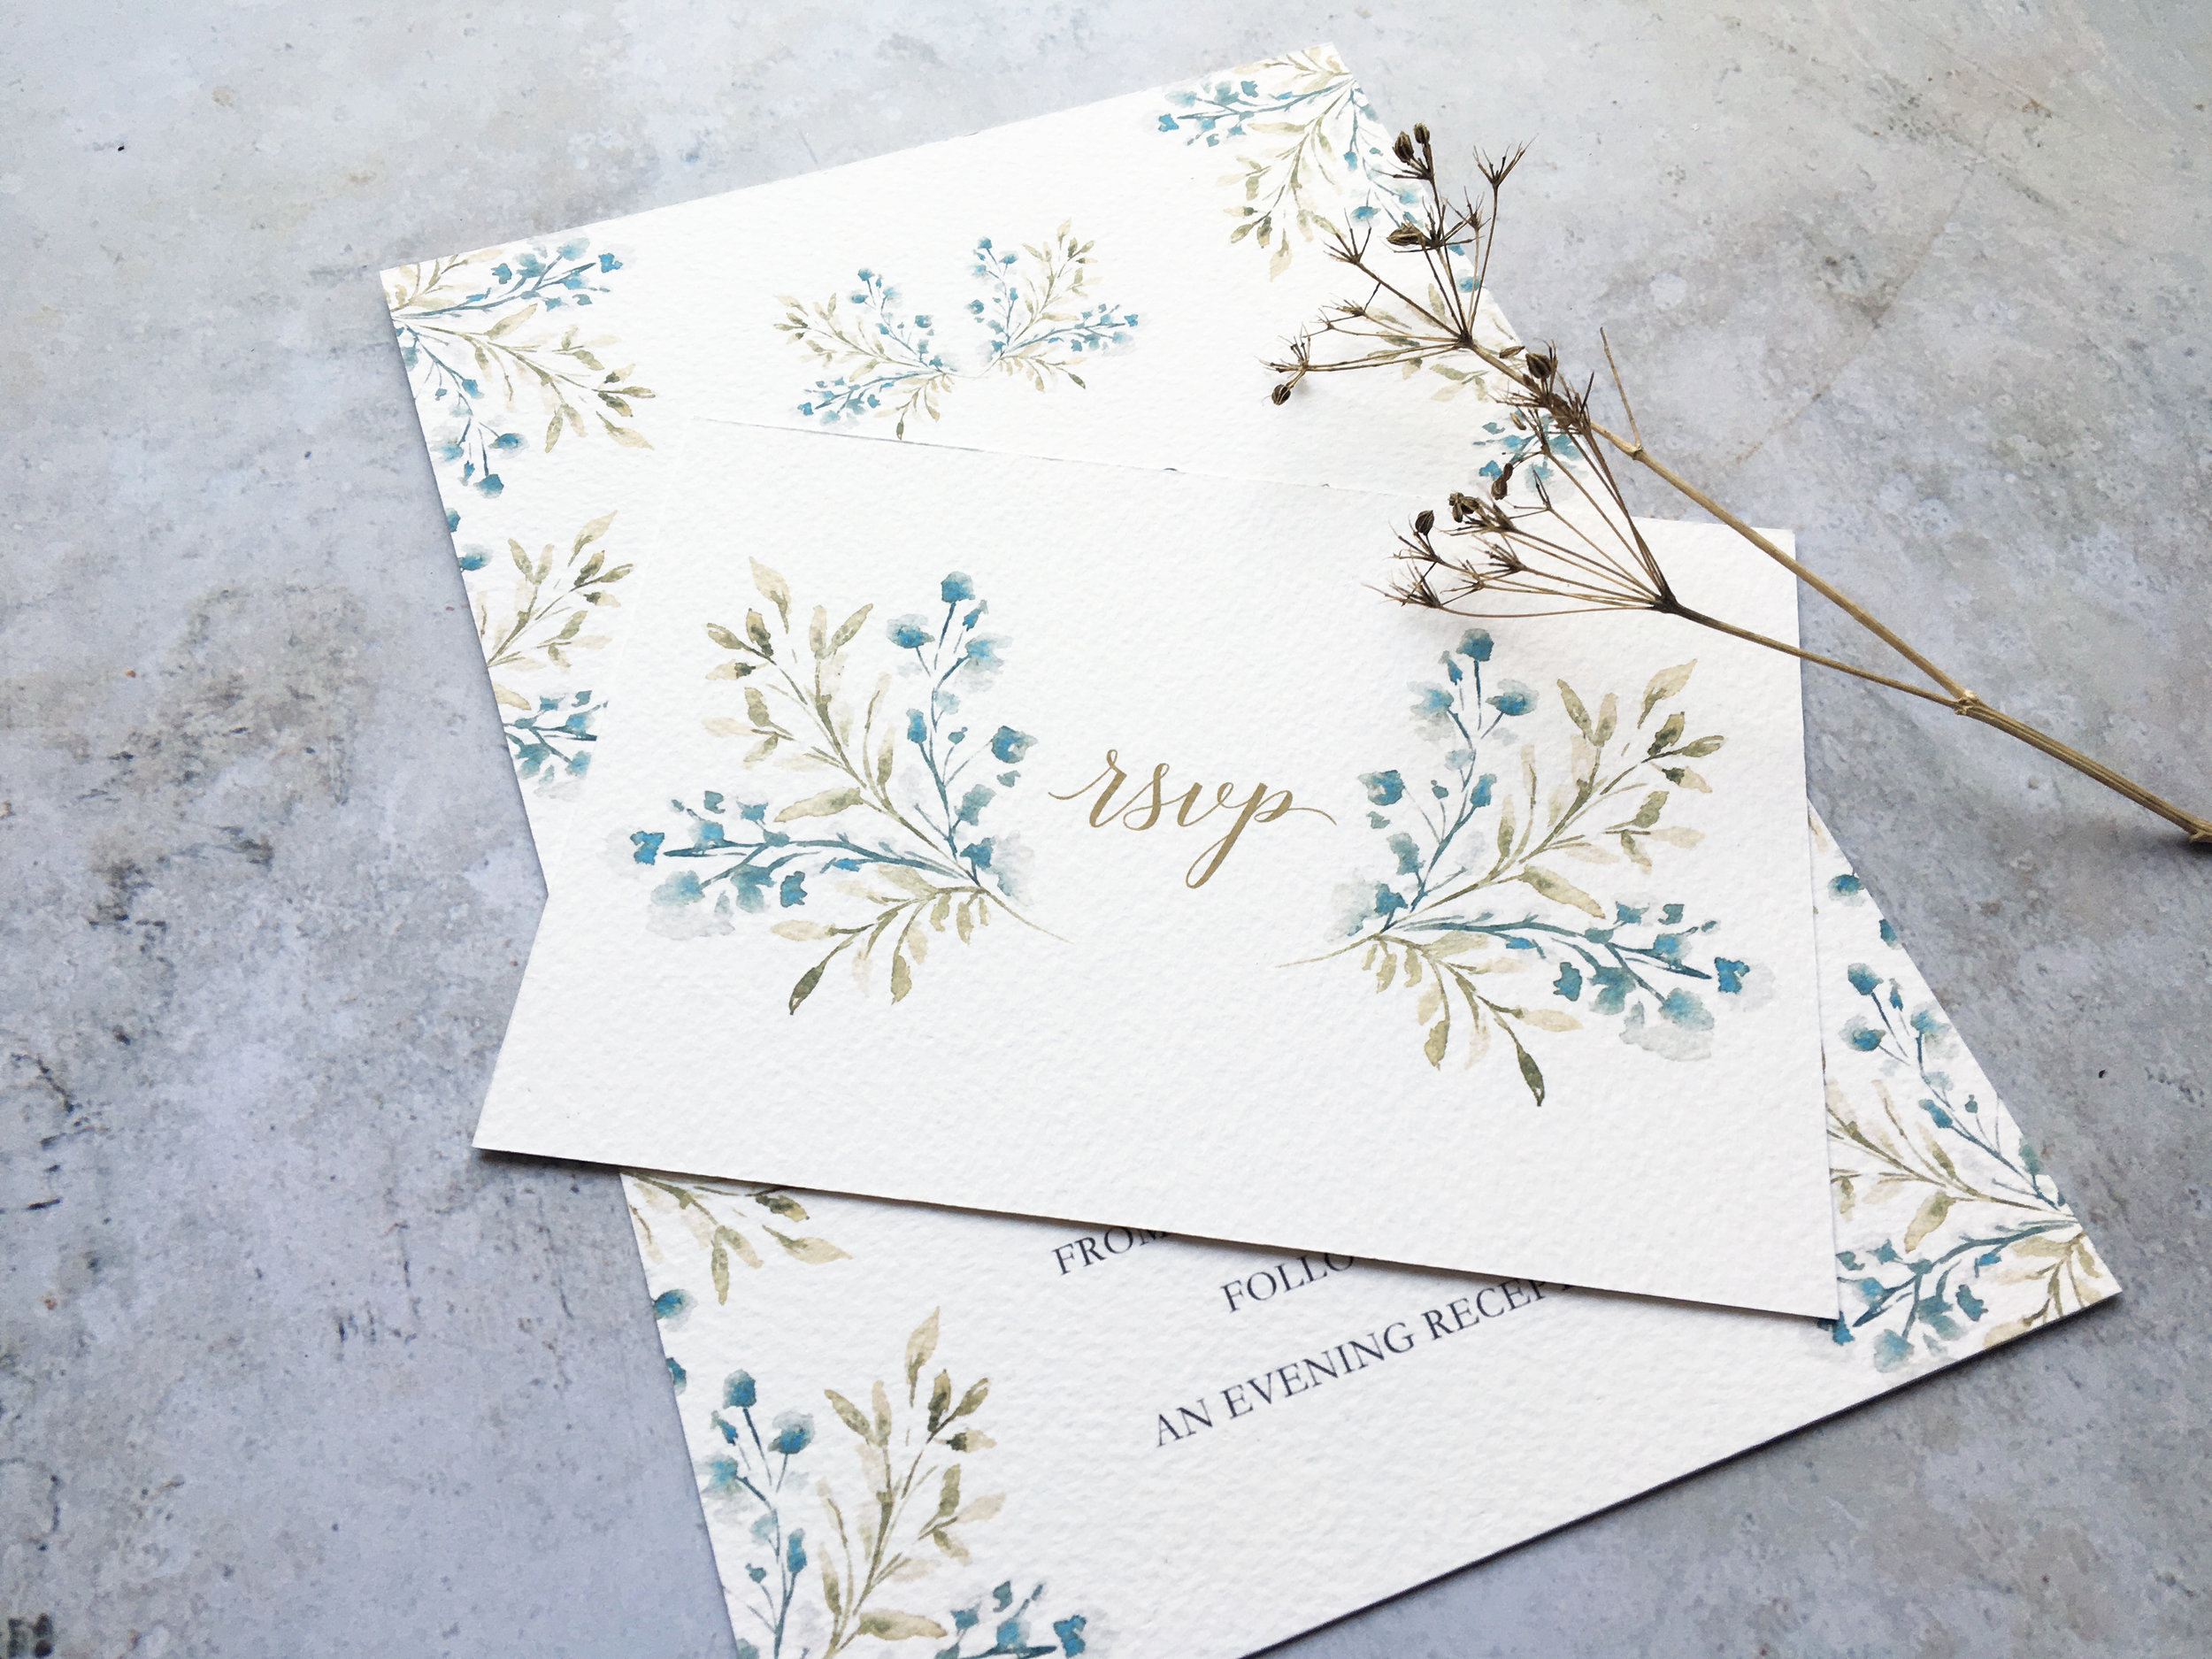 Enchanted invite and rsvp.jpg